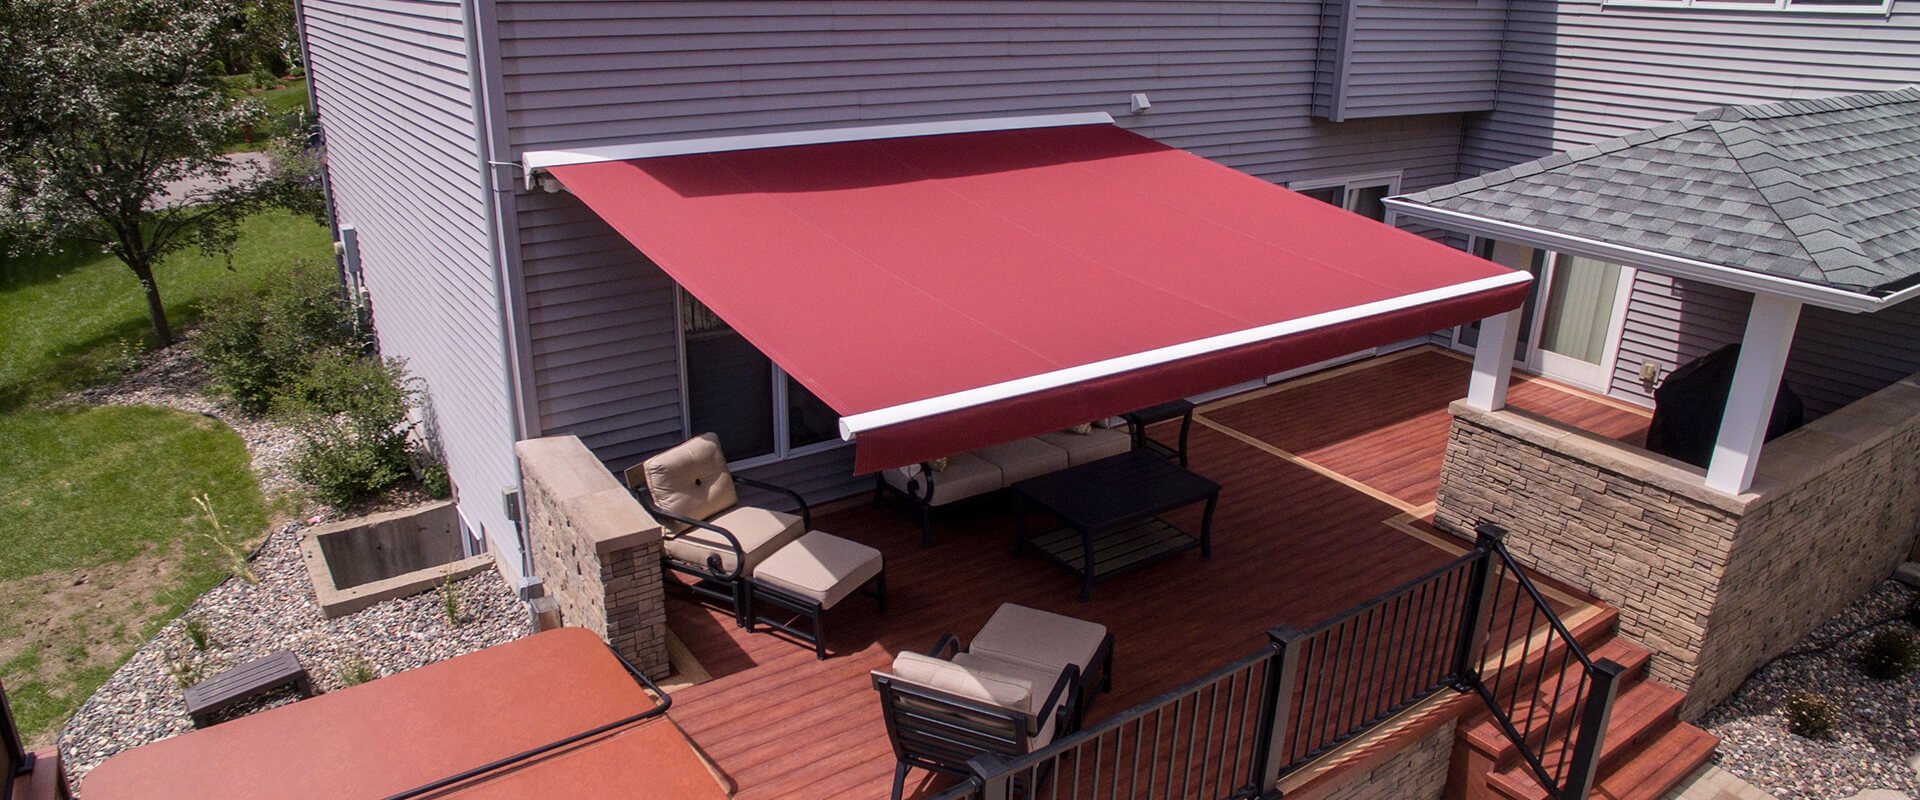 The Many Benefits Retractable Awnings Can Offer Homeowners